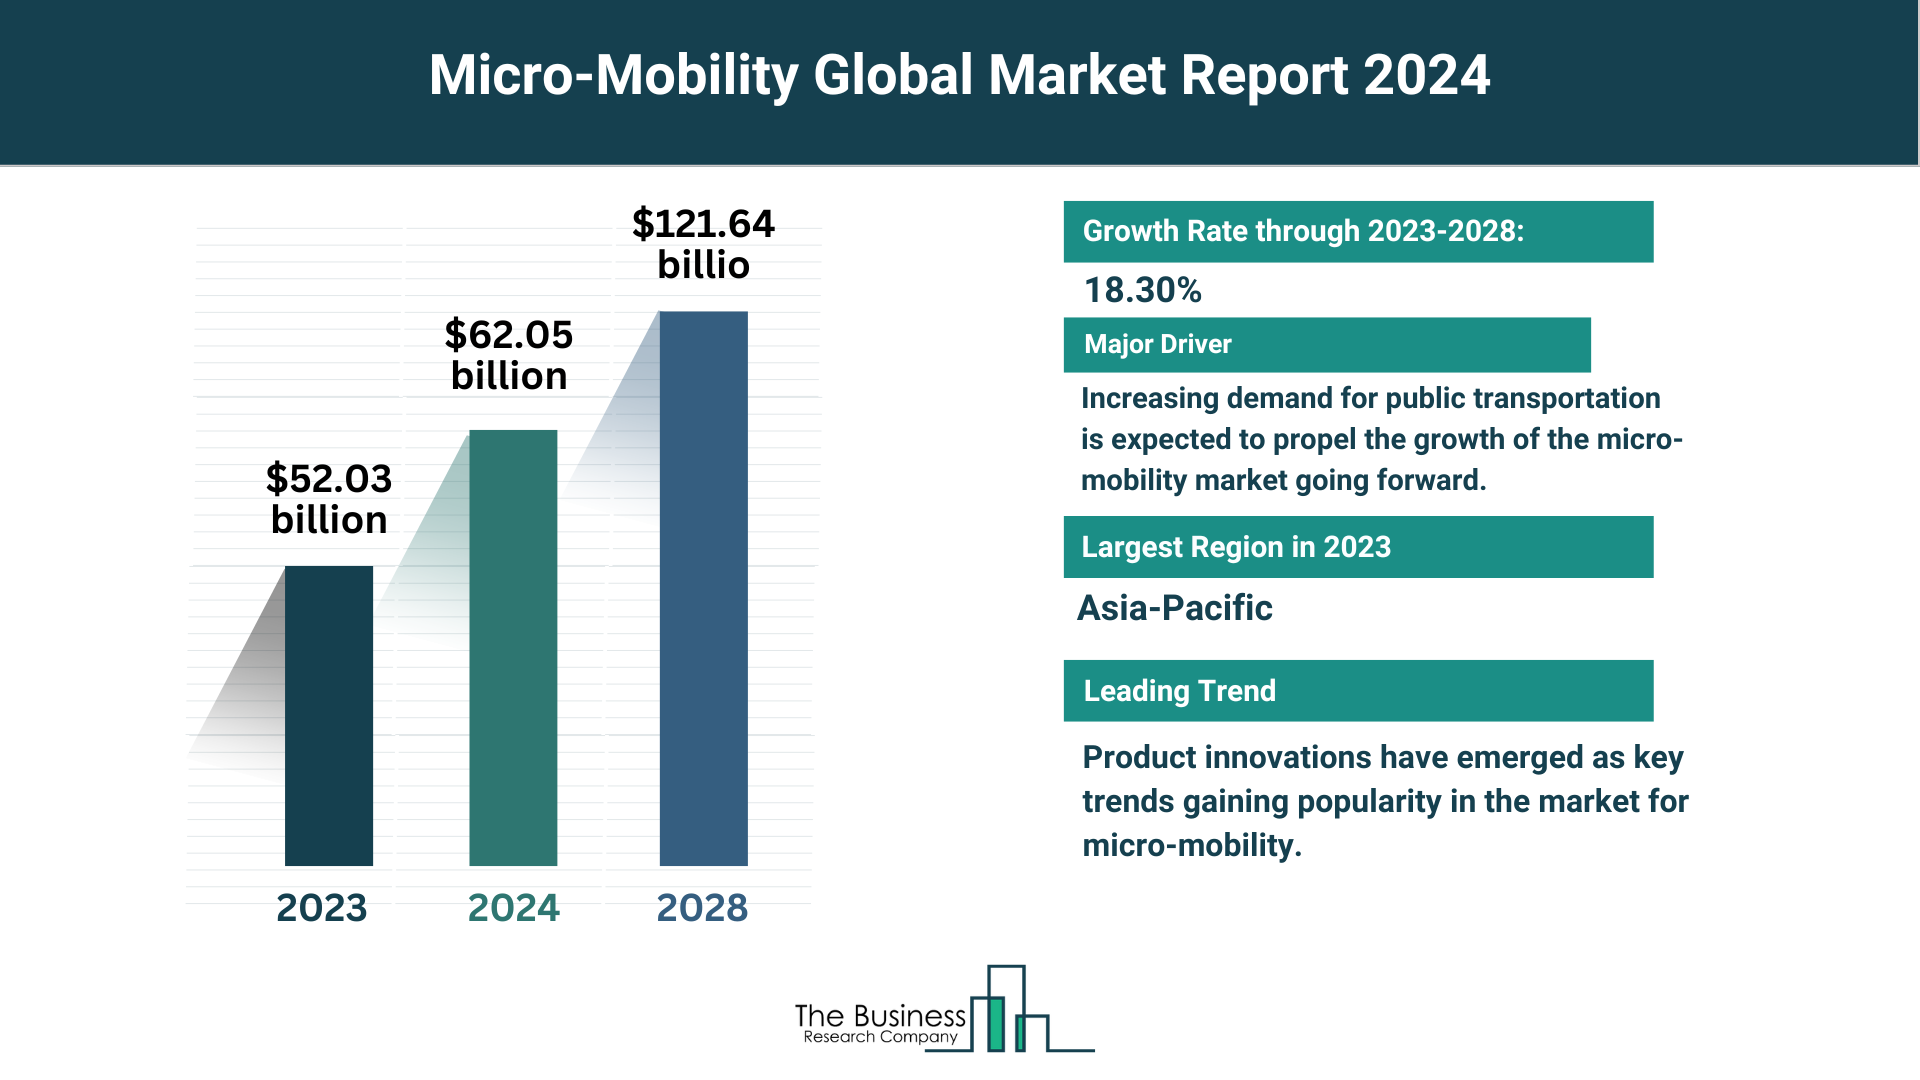 Global Micro-Mobility Market